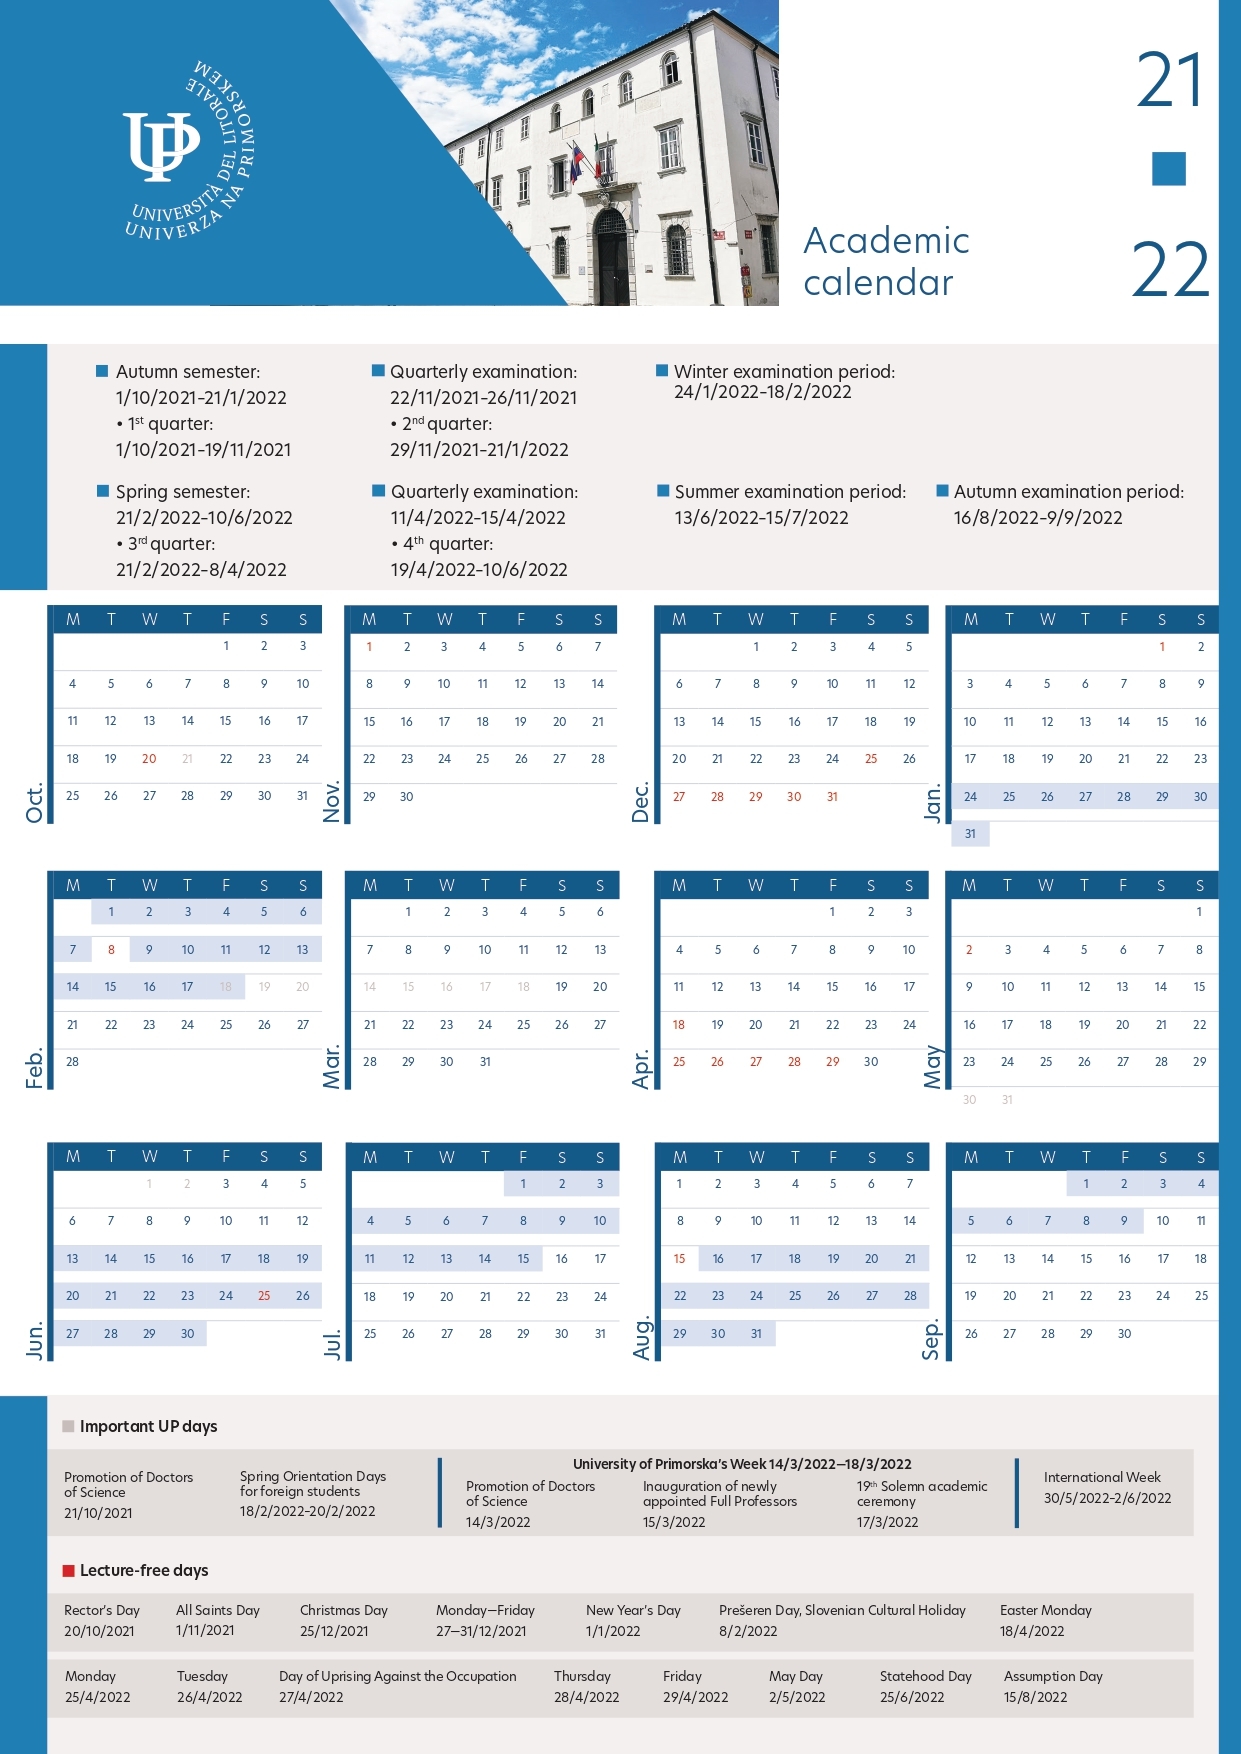 Study Calendar for the Academic Year 2021/22 UP FAMNIT